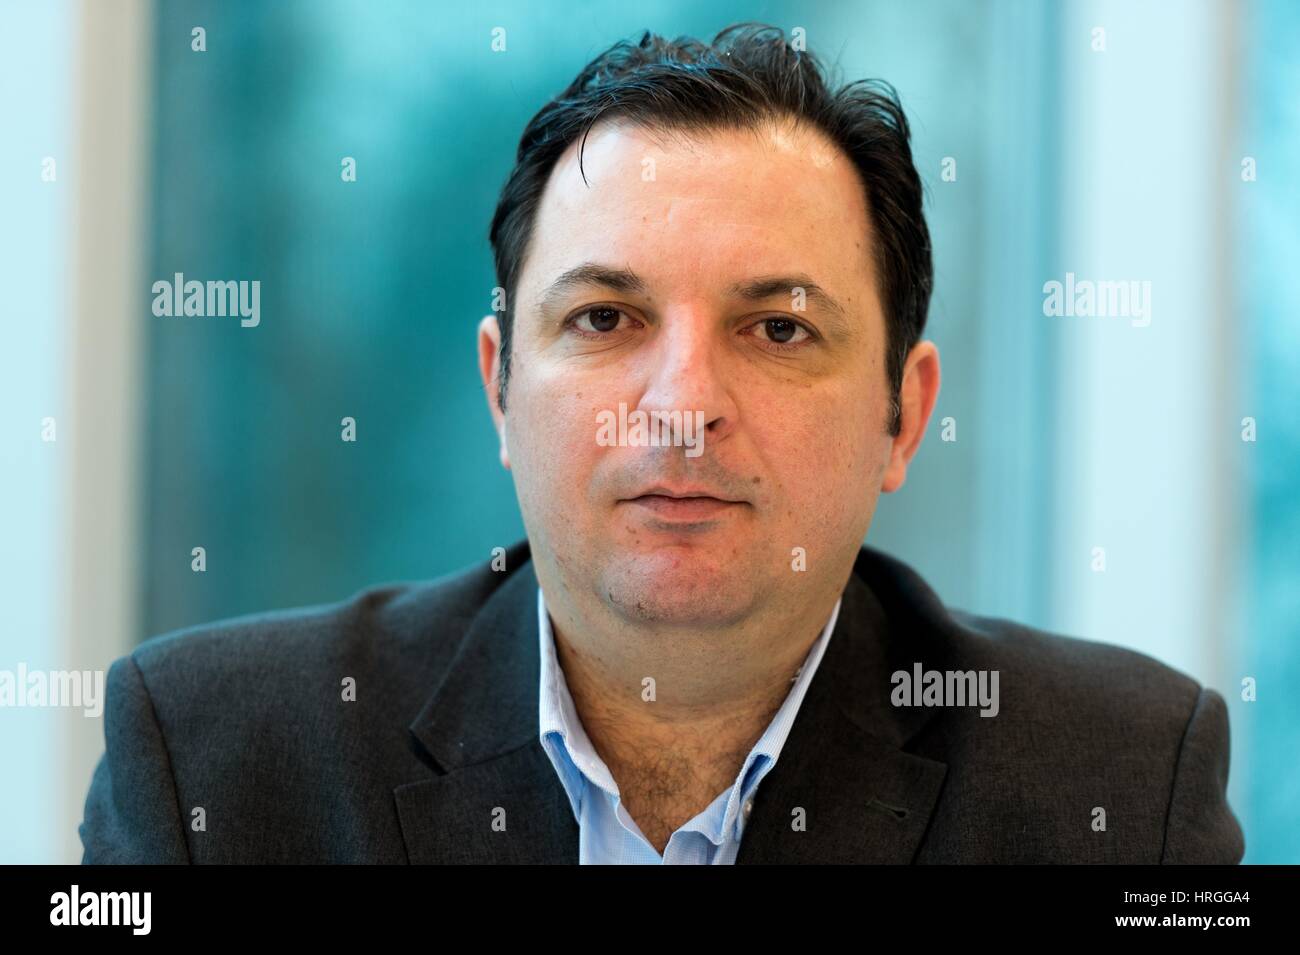 Berlin, Germany. 02nd Mar, 2017. The Syrian lawyer and human rights activist Masen Darwish ahead of a press conference on torture under the Assad regime in Syria in Berlin, Germany, 02 March 2017. Photo: Monika Skolimowska/dpa/Alamy Live News Stock Photo